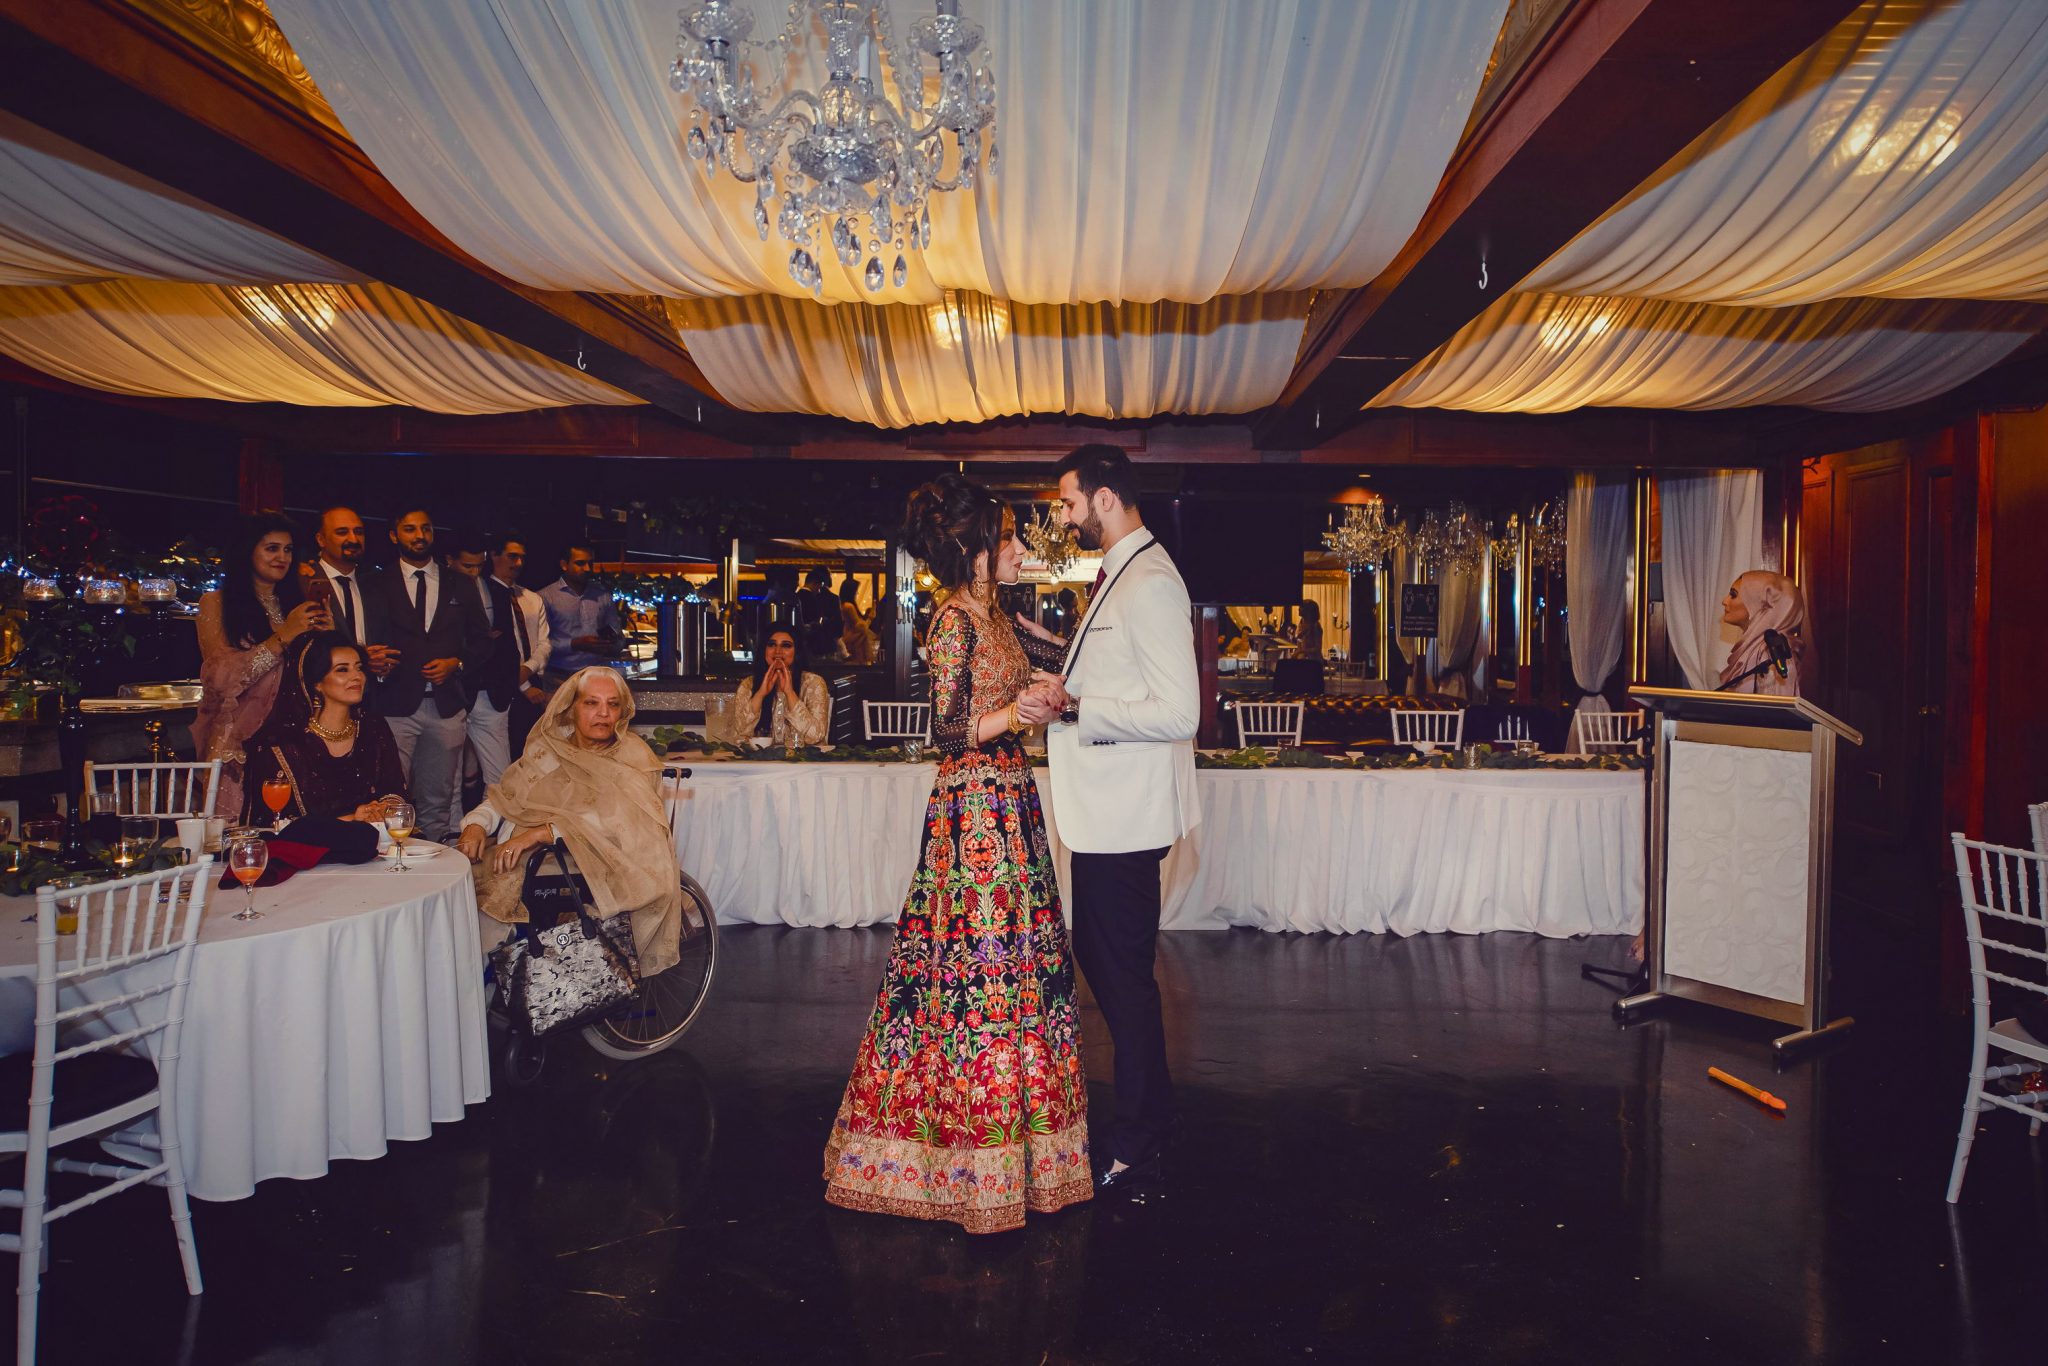 A Groom and the Bride are dancing together during reception